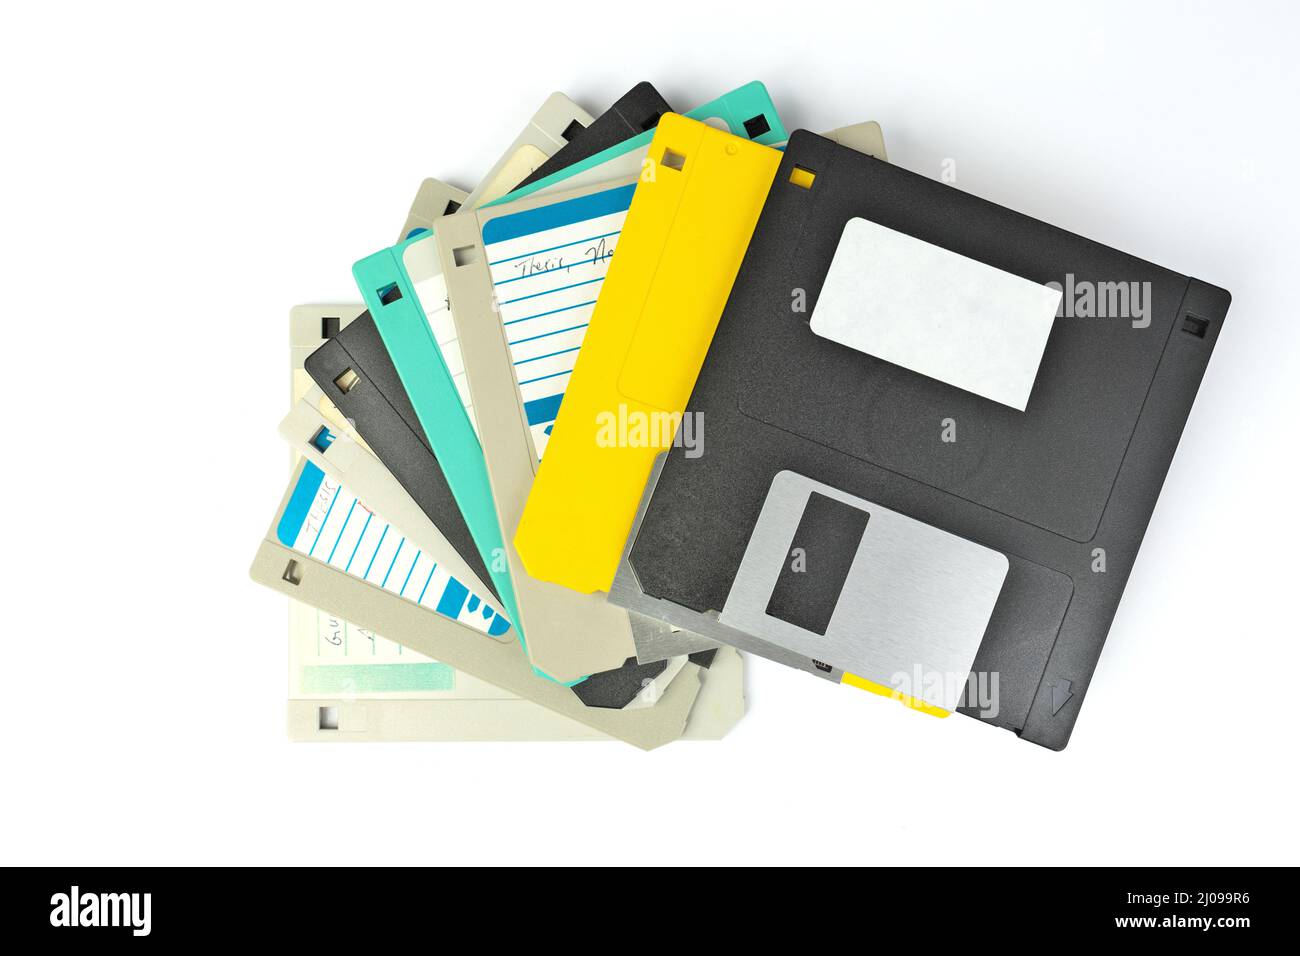 A pile of 3.5 Inch Floppy disks for background. Retro digital storage technology. Stock Photo